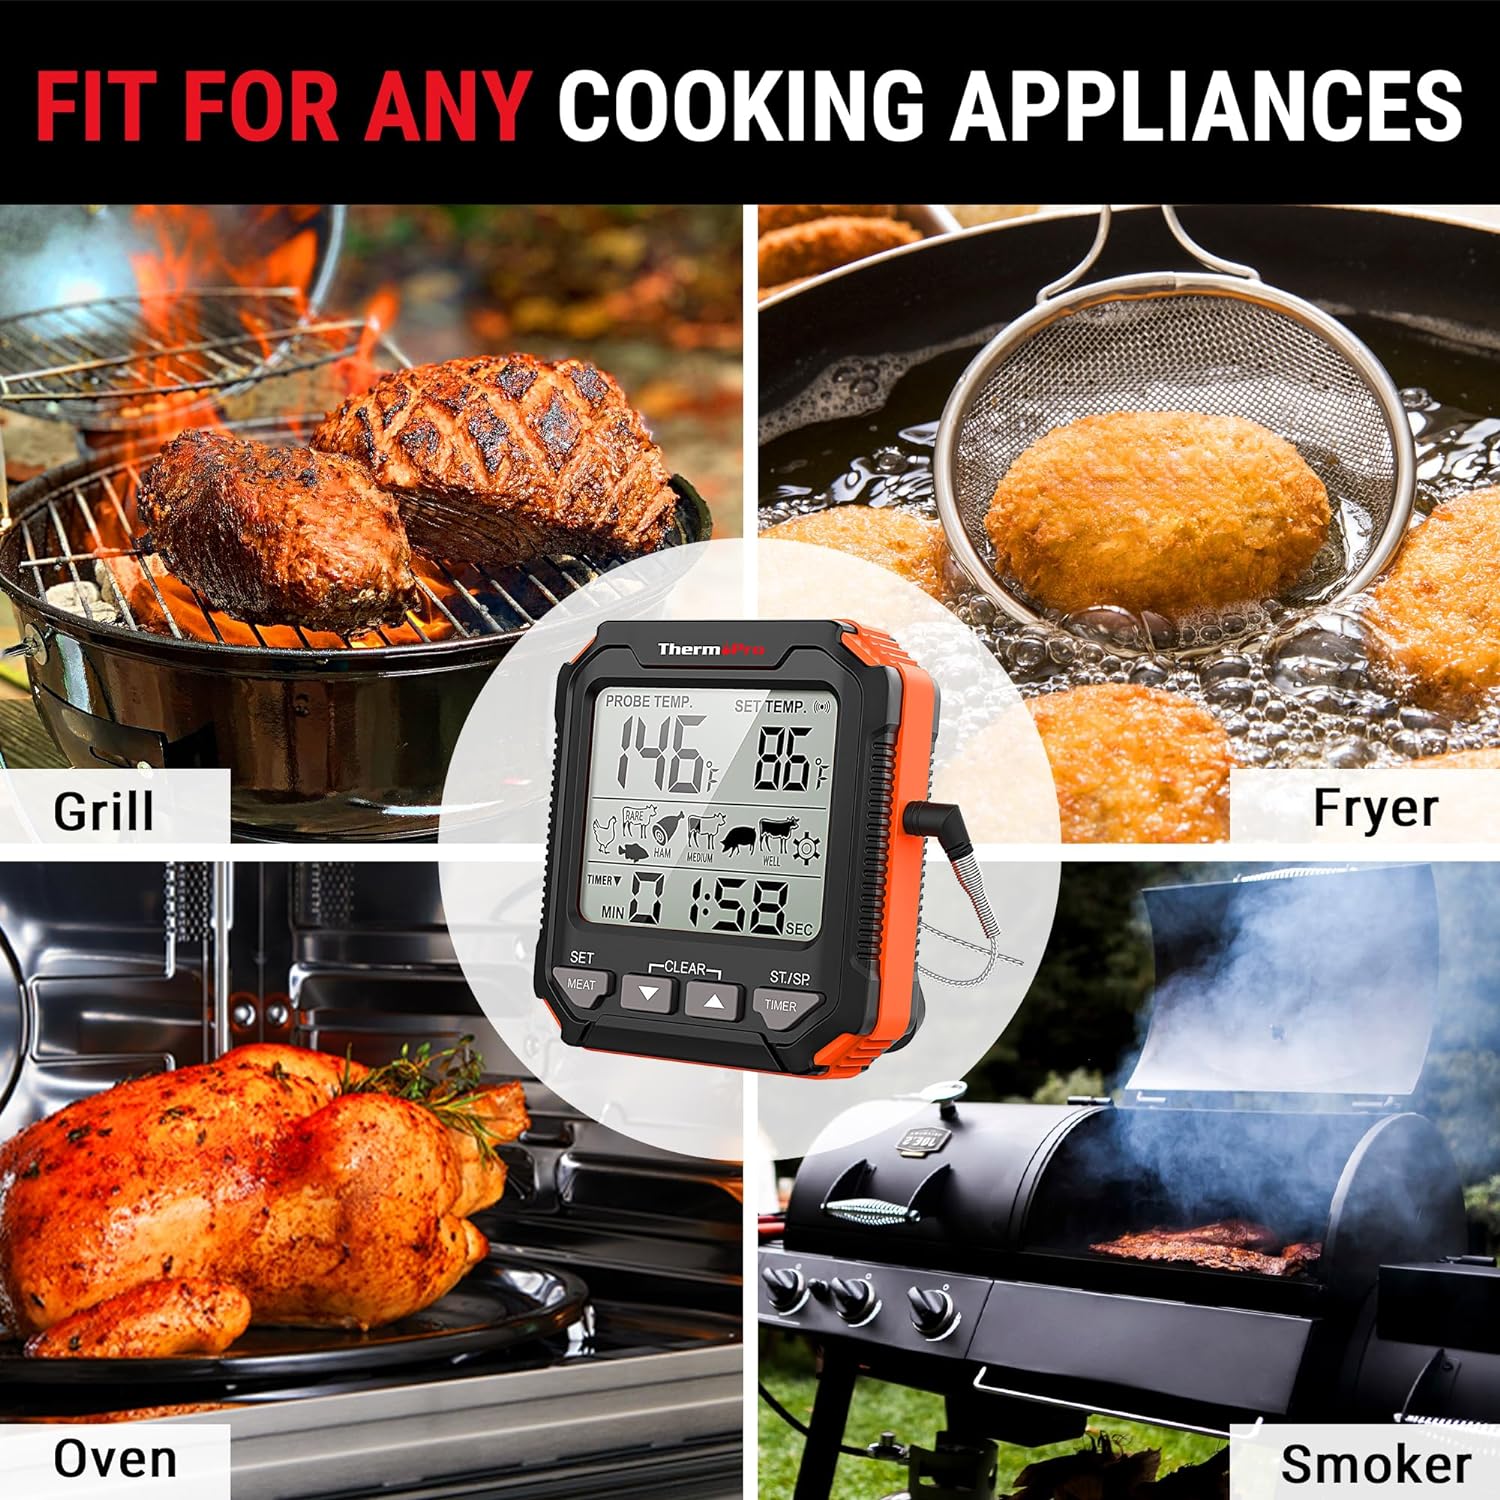 ThermoPro TP716 Digital Meat Thermometer